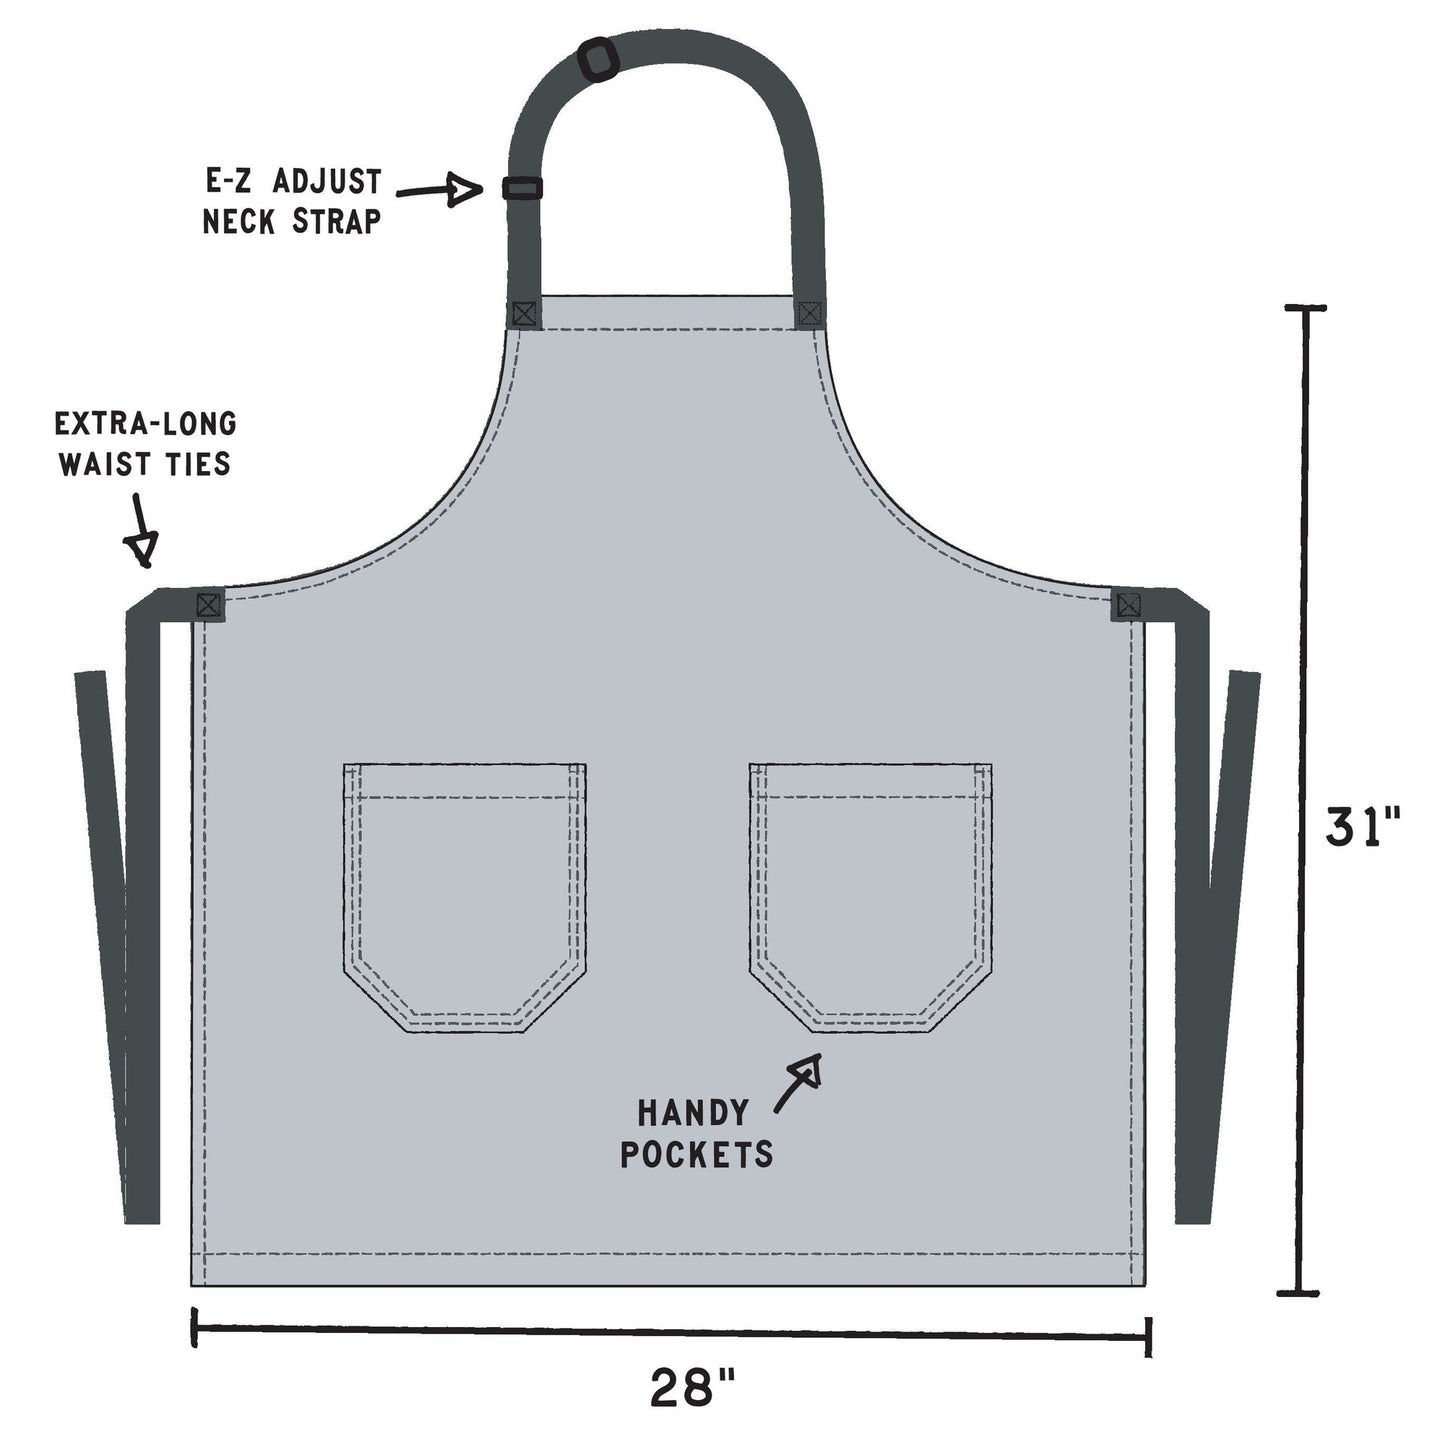 Last Call! Beer Me And You Know What? Beer You Funny Cooking and BBQ Apron Unisex 2 Pockets Adjustable Strap 100% Cotton